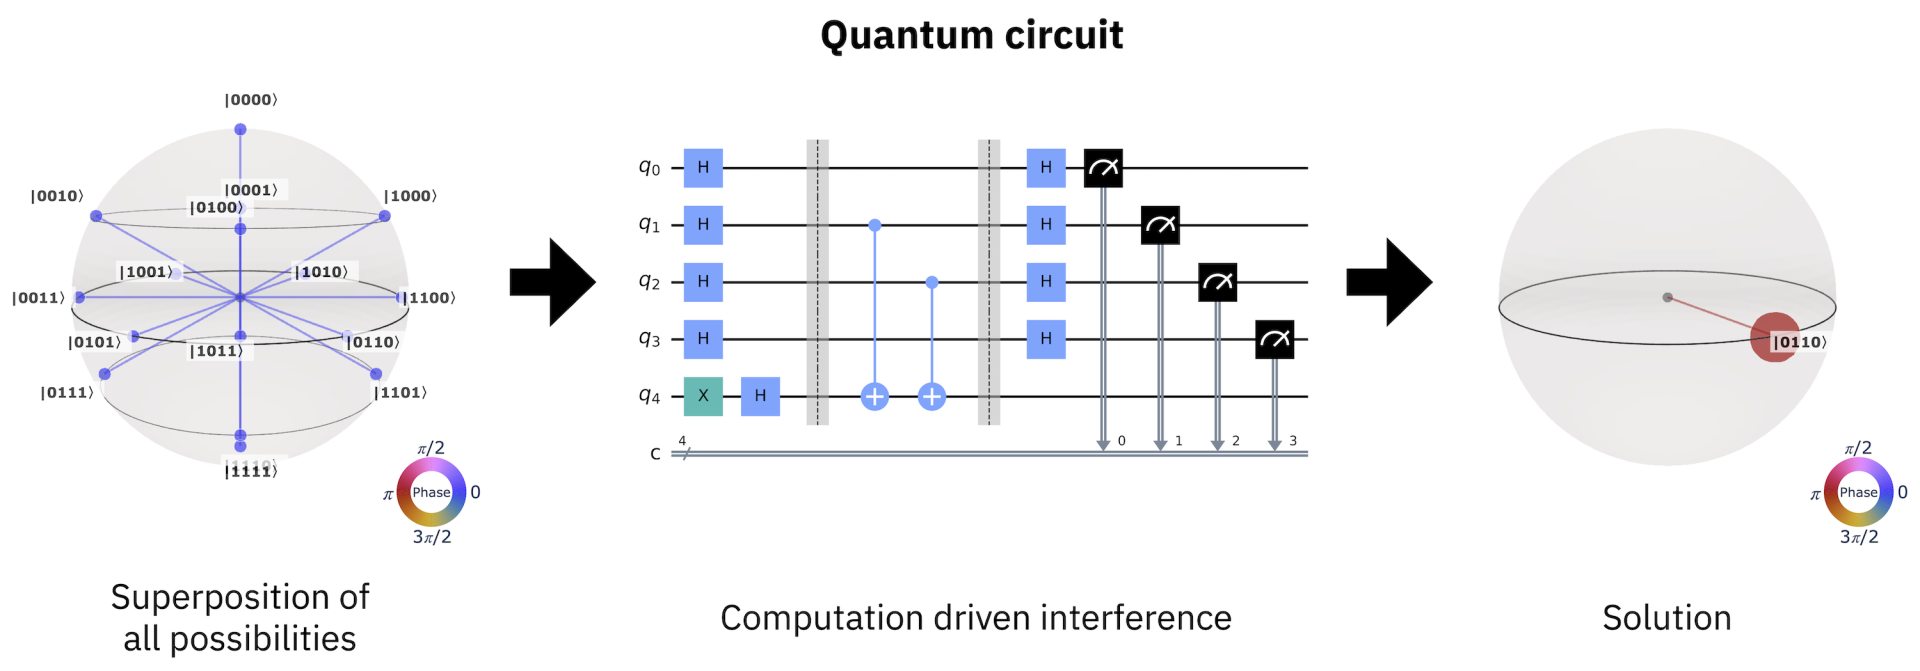 quantum_interference.png